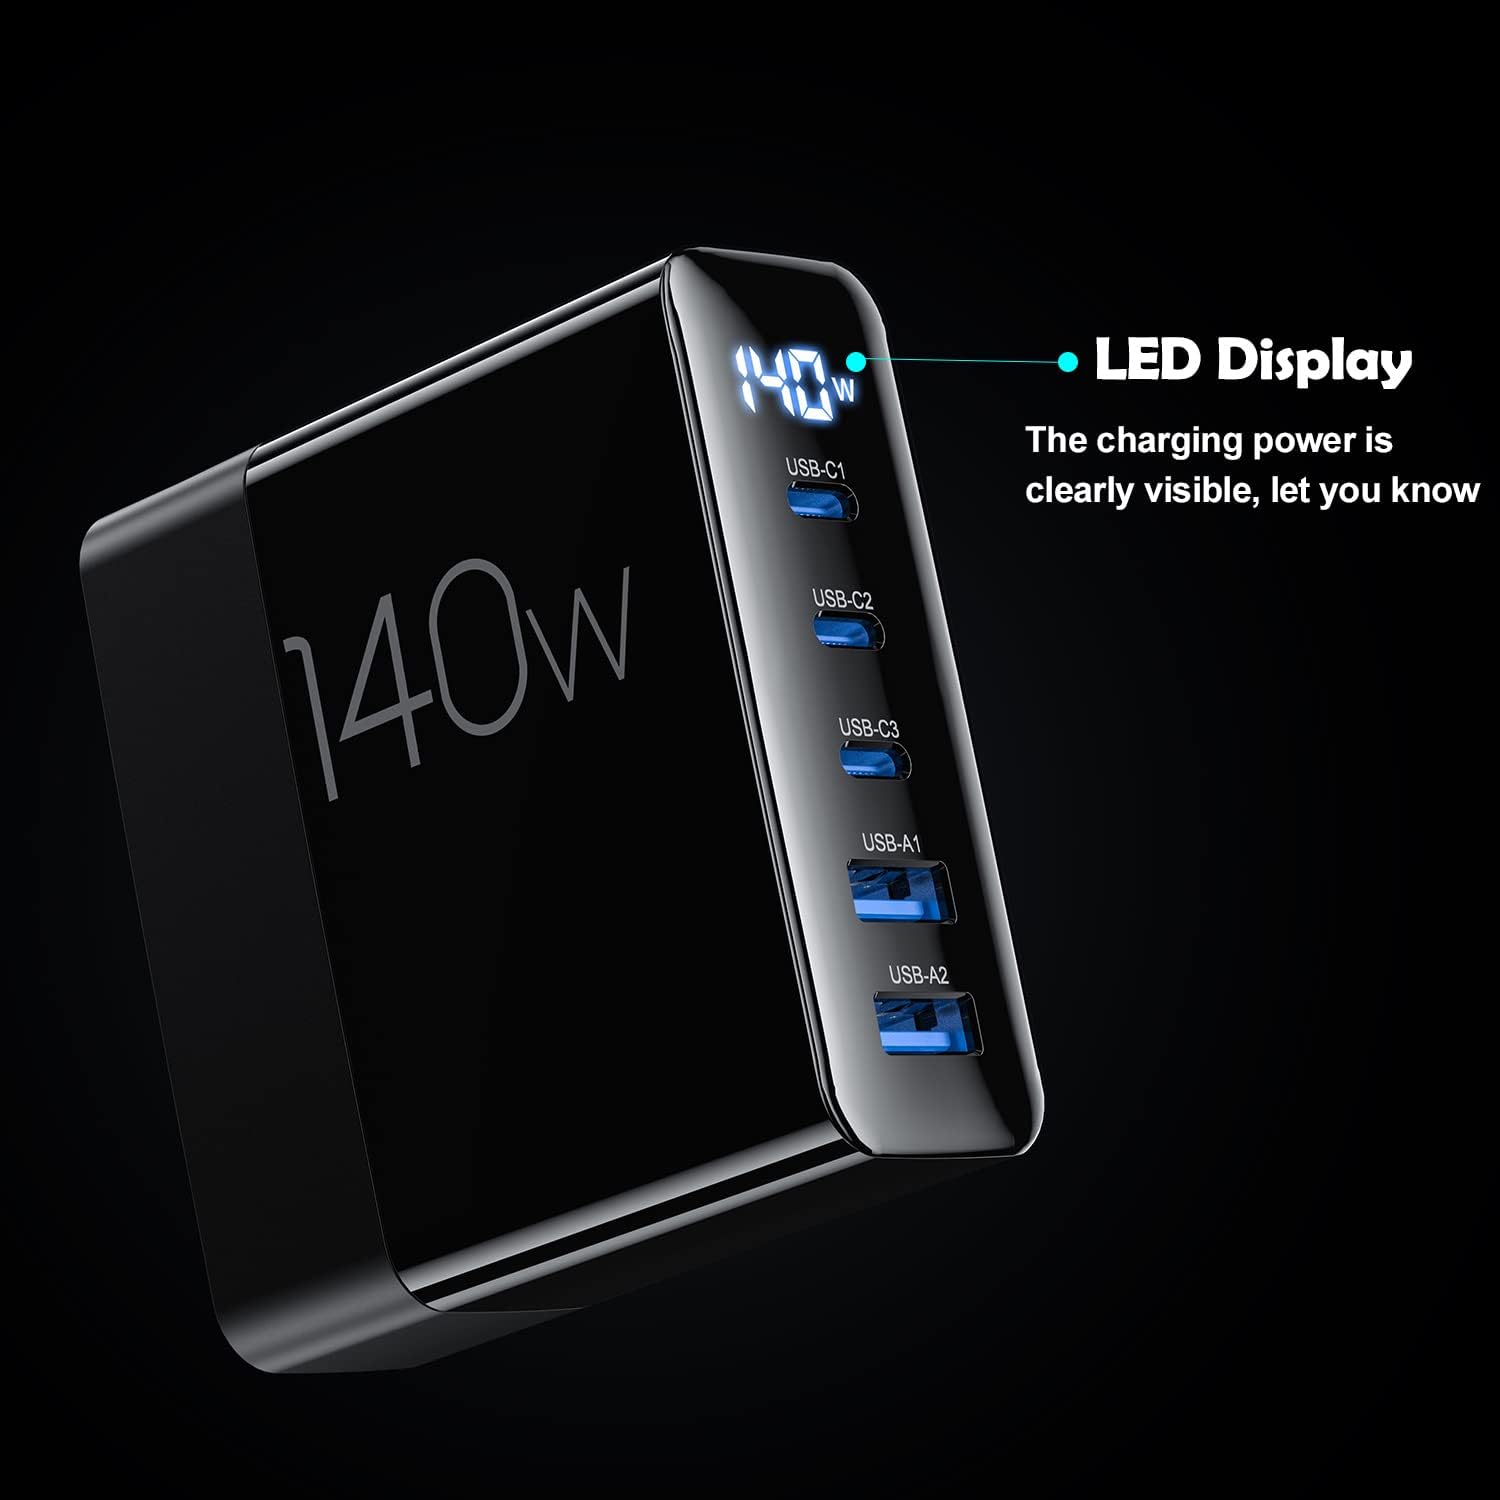 140W USB C Charger with LED Display, 5-Port GaN USB Desktop Charging Station with 3 USB C+2 USB A